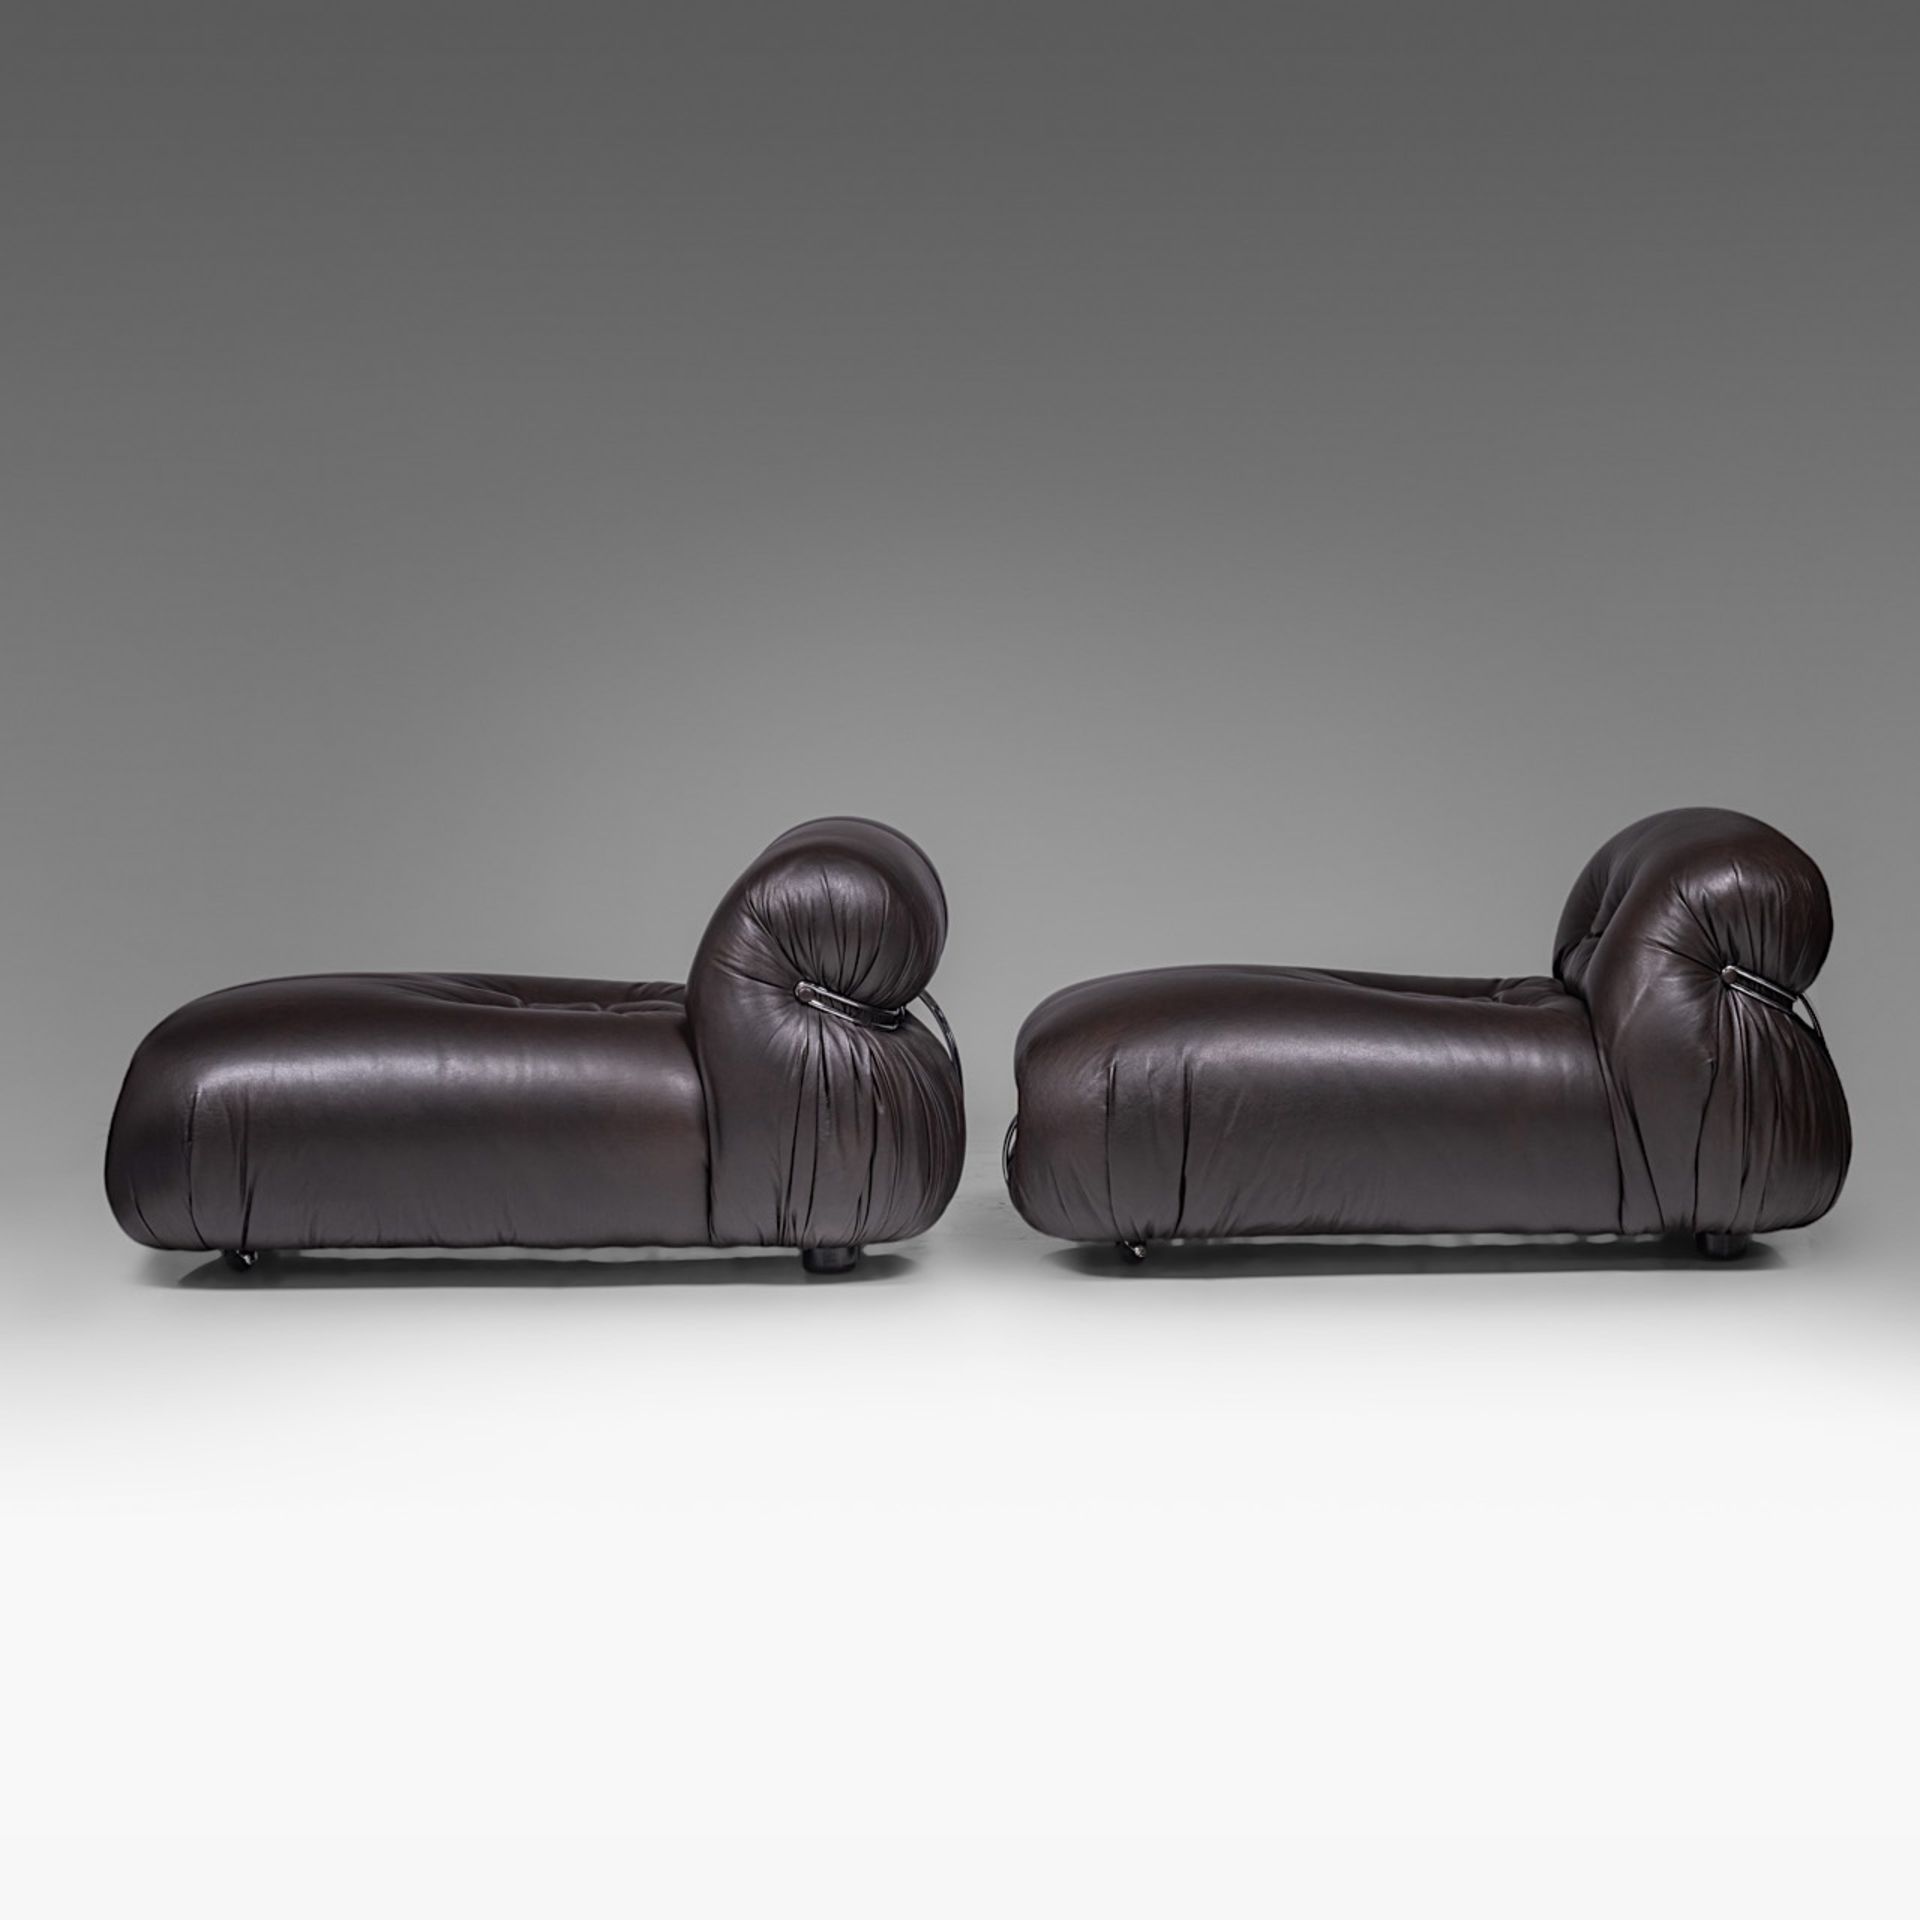 Two Soriana chaise-longues in brown leather and chrome by Afra & Tobia Scarpa for Cassina - Image 5 of 8